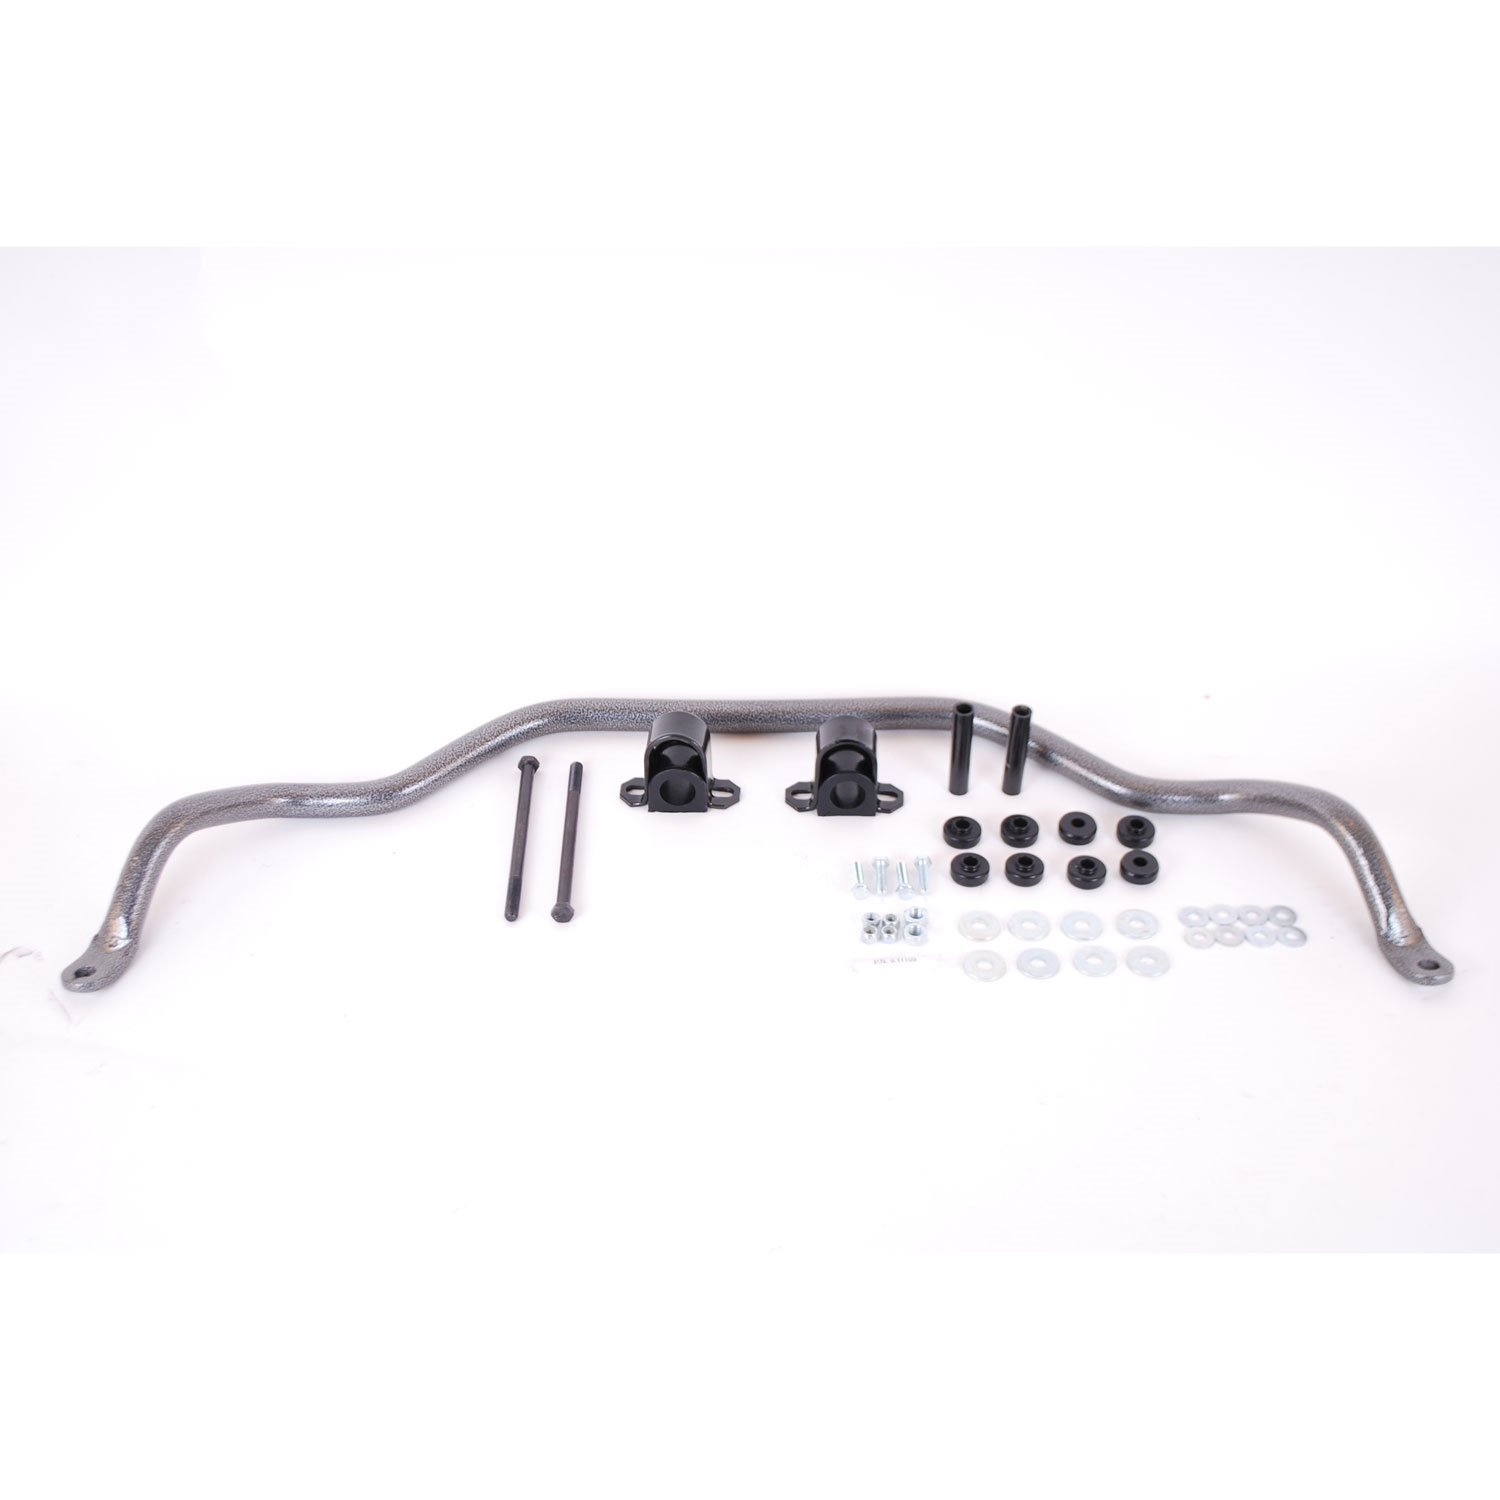 Front Sway Bar for 1962-1967 Chevy II and Nova